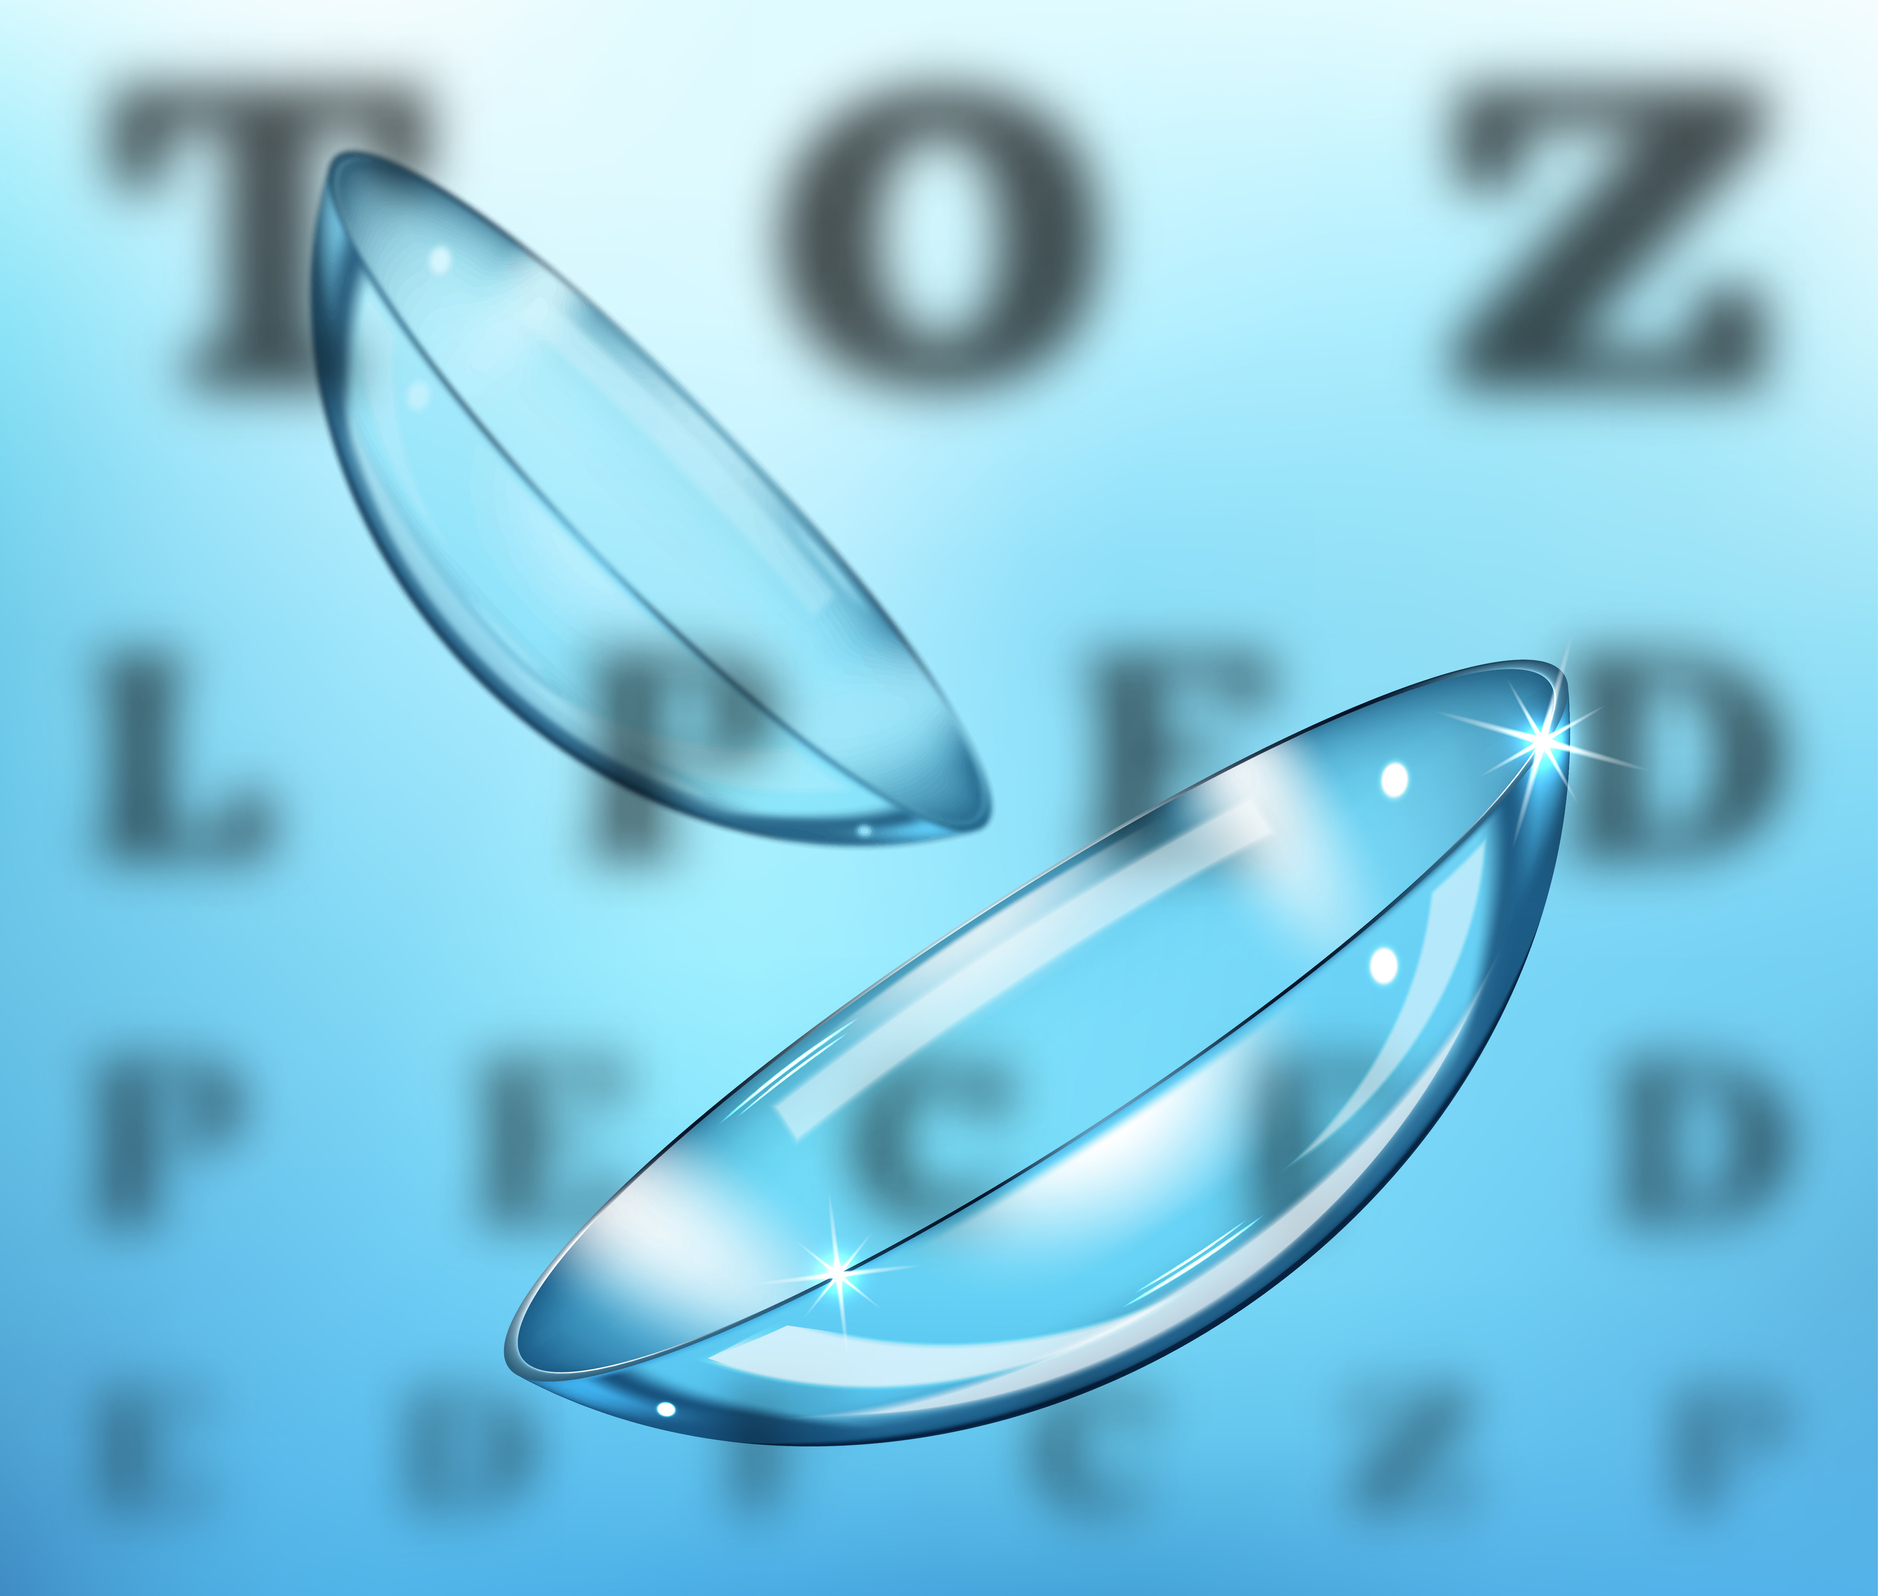 Medicine and vision concept – contact lenses on eyesight test chart background